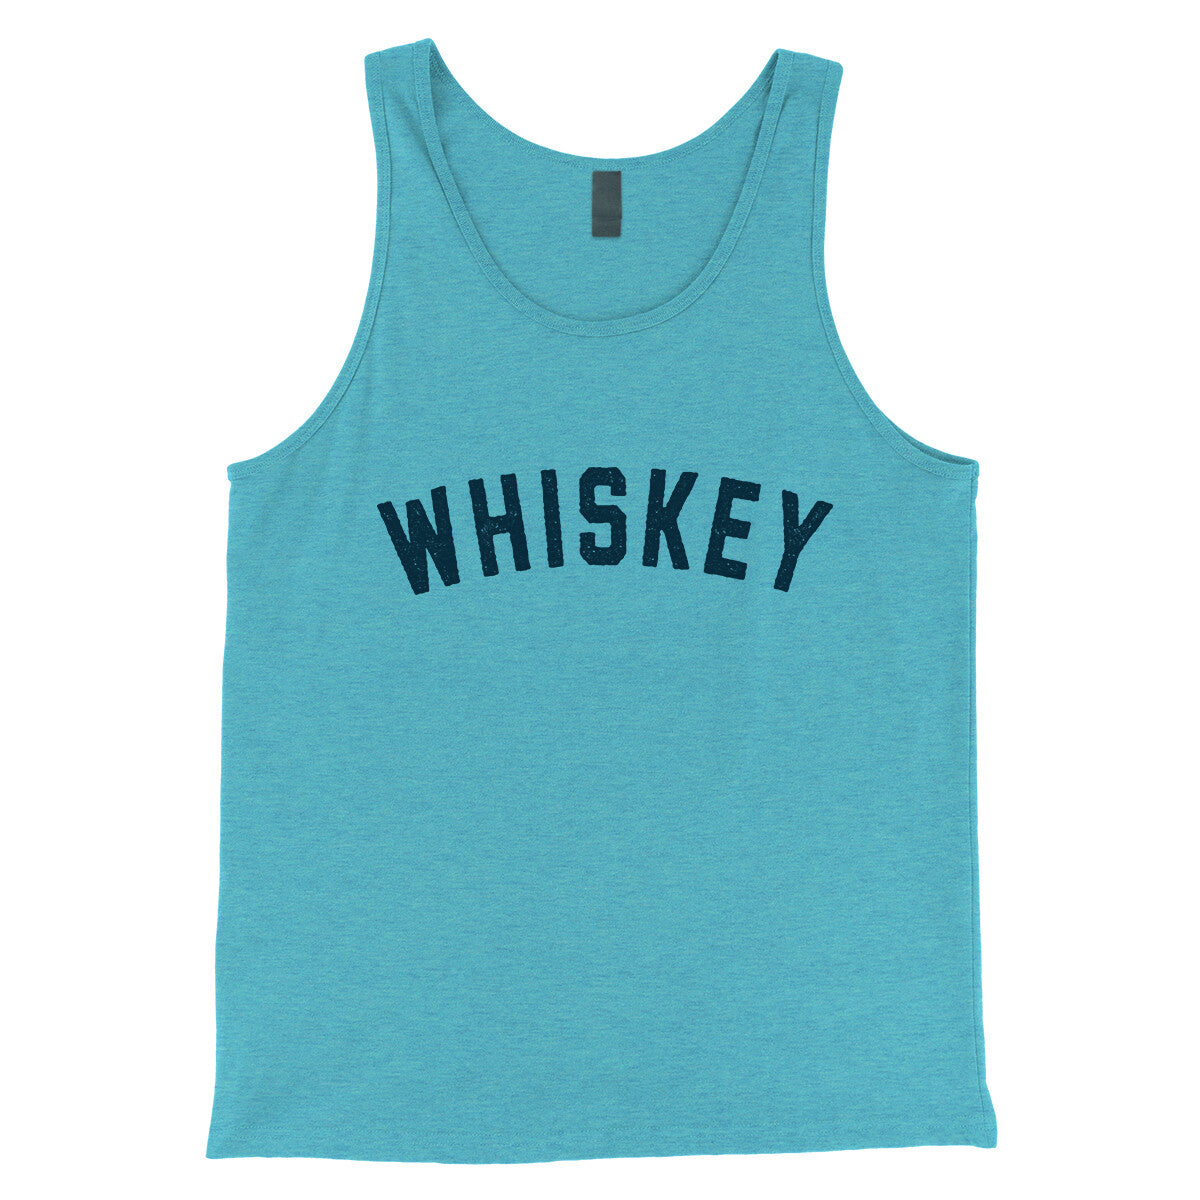 Whiskey in Aqua Triblend Color